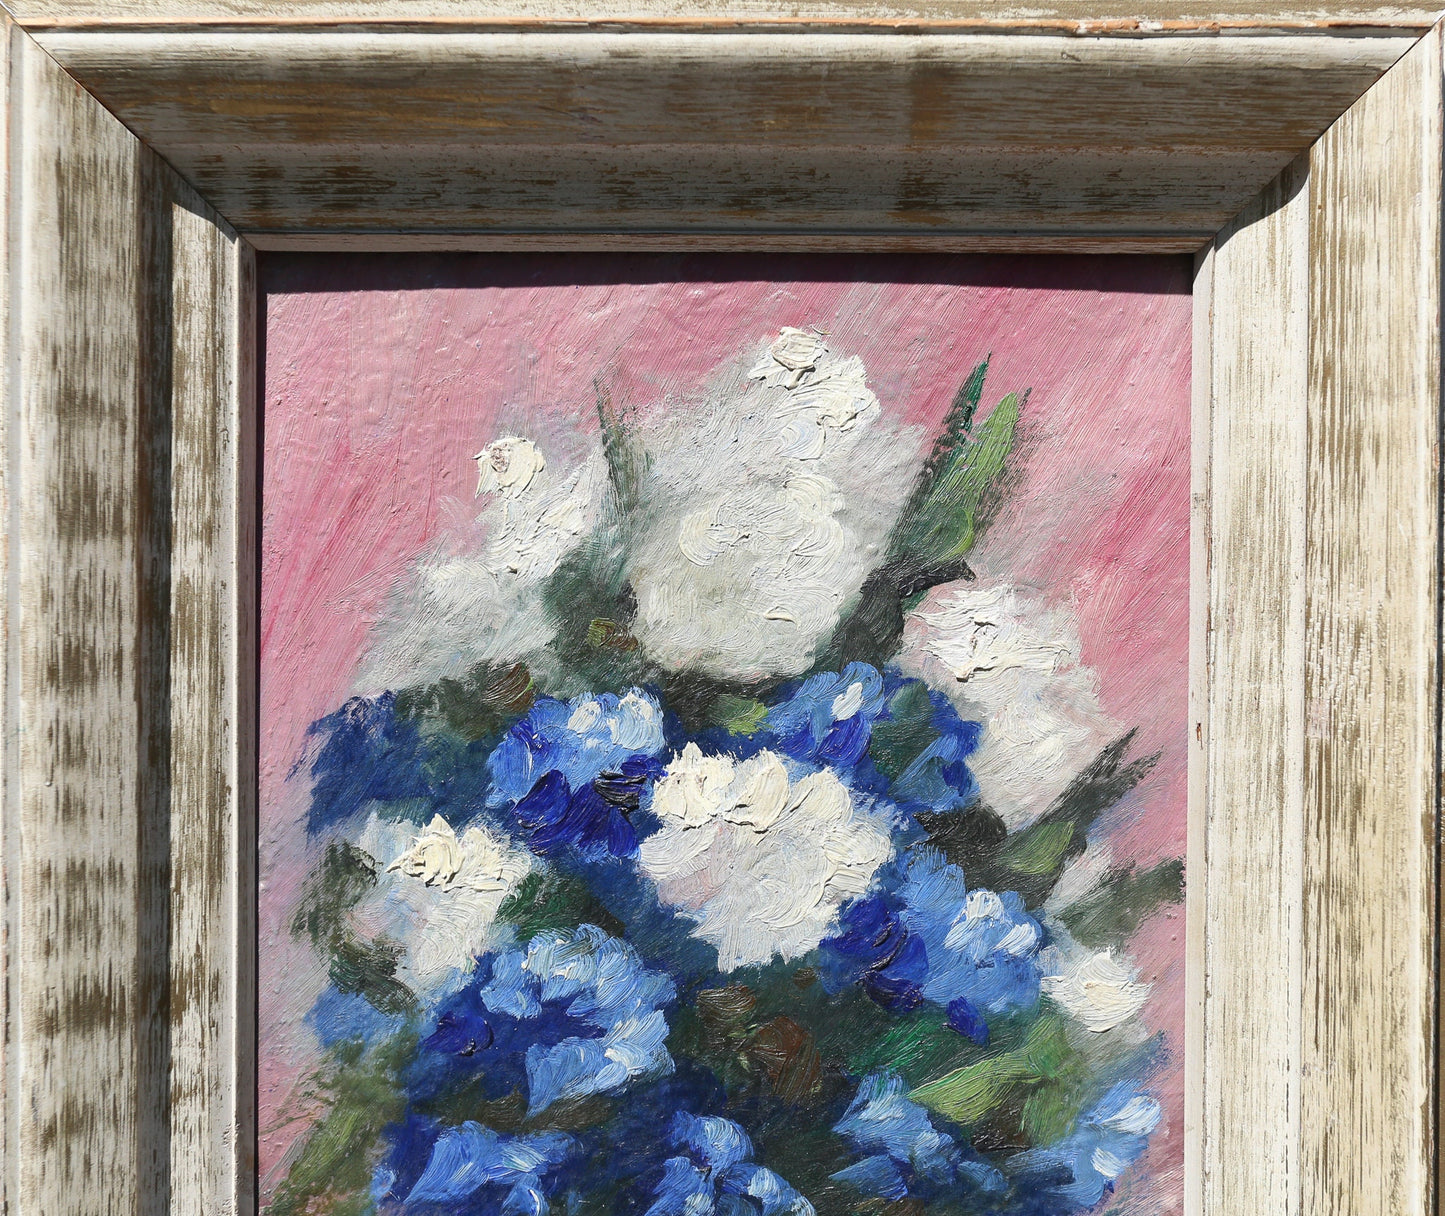 Painting Oil on Board Masonite Hydrangeas in Blue and White Artist Signed Roubert 1950s Period Frame